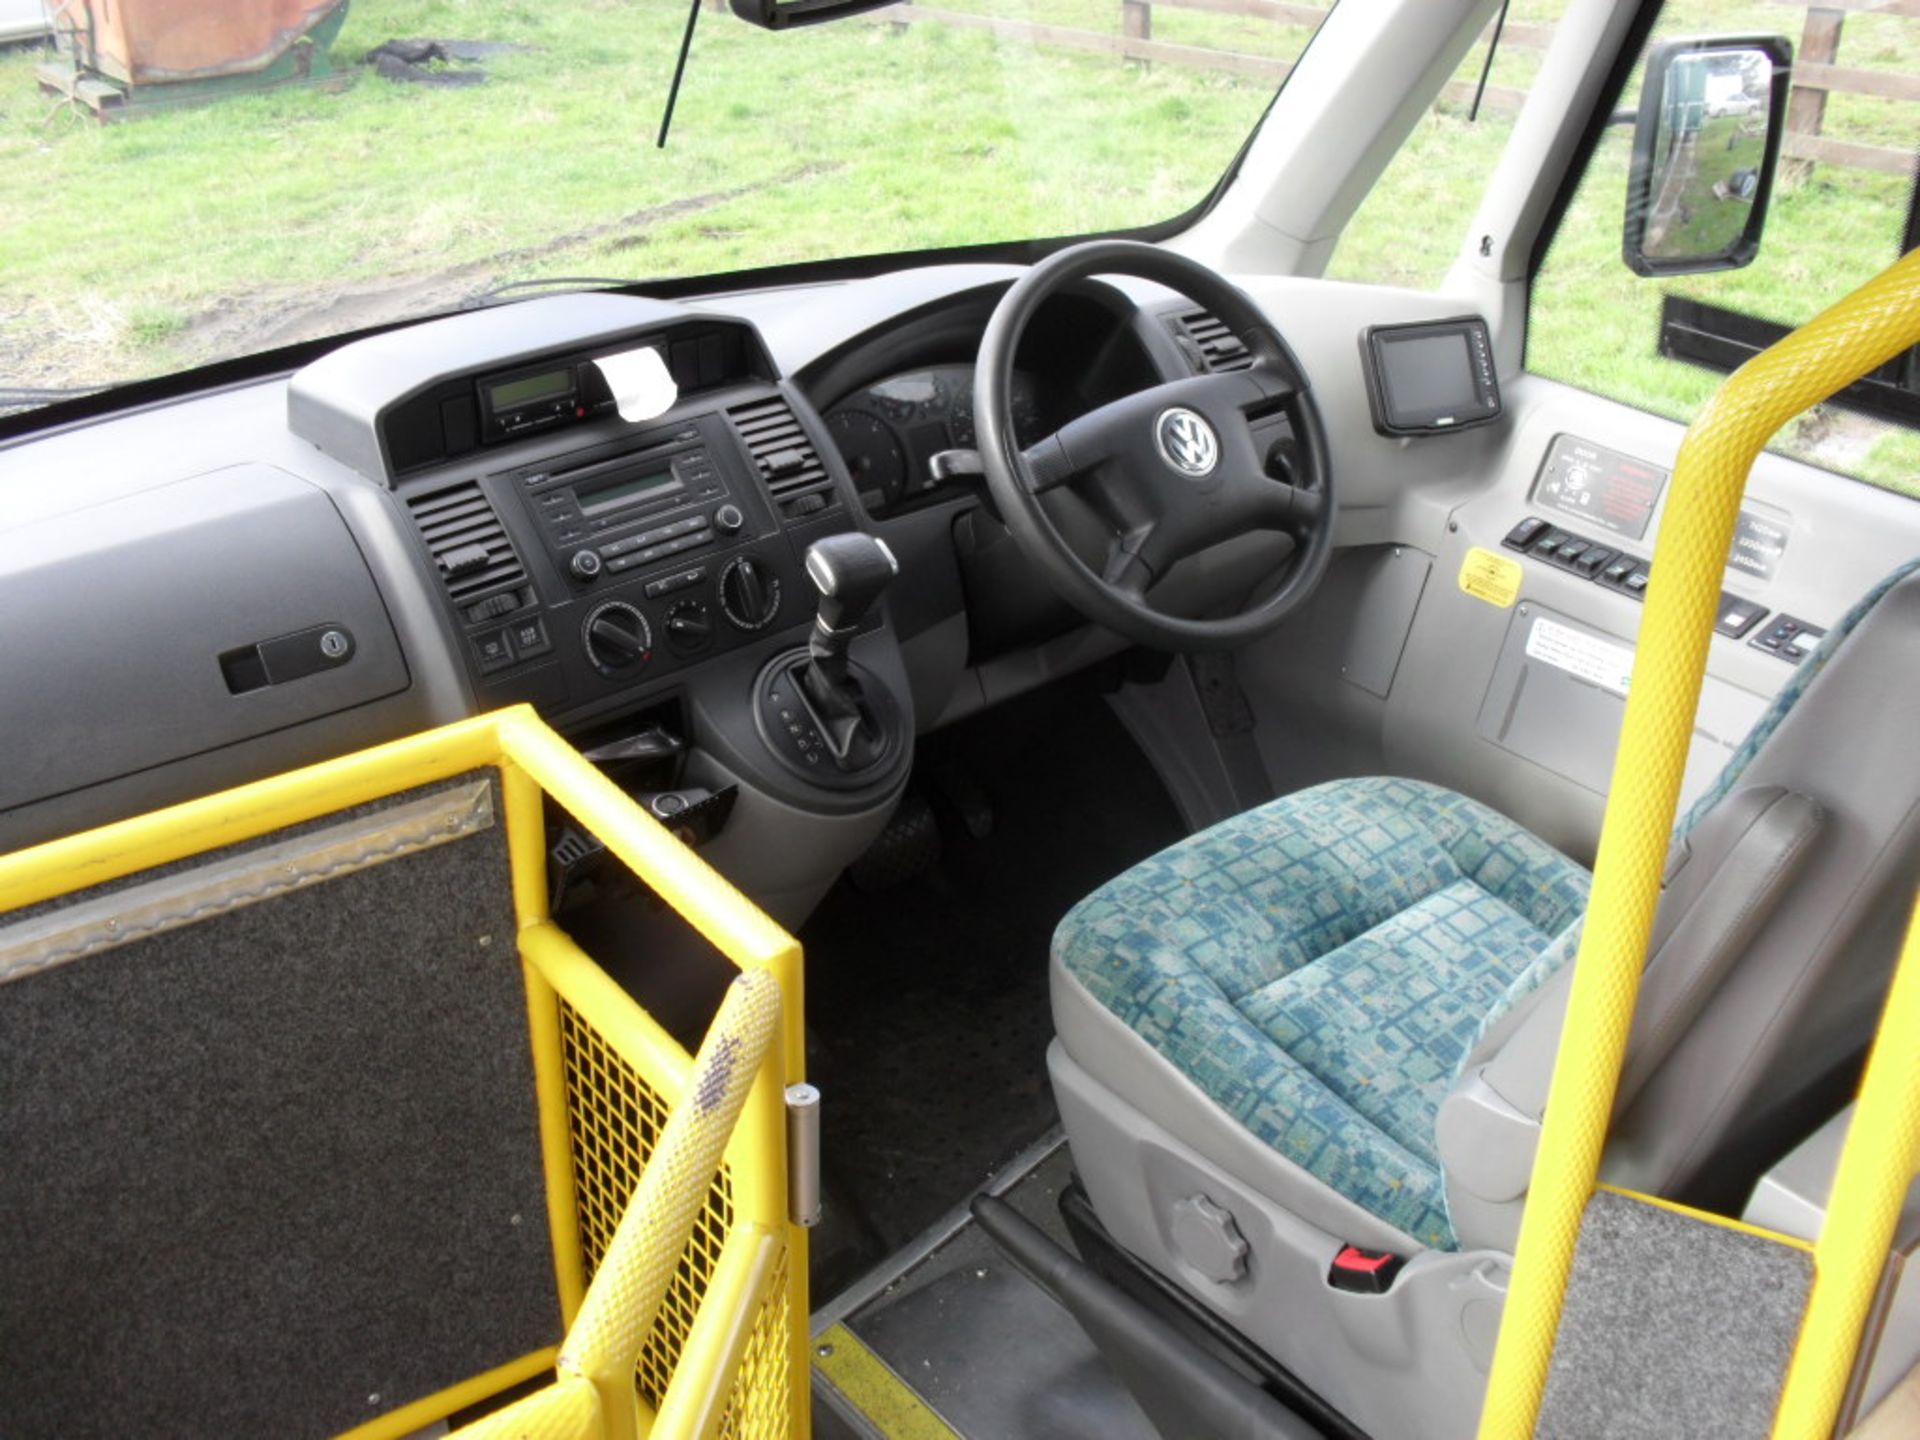 2007 VW Transporter based 12 seater mini bus with disabled access ramp. - Image 9 of 19